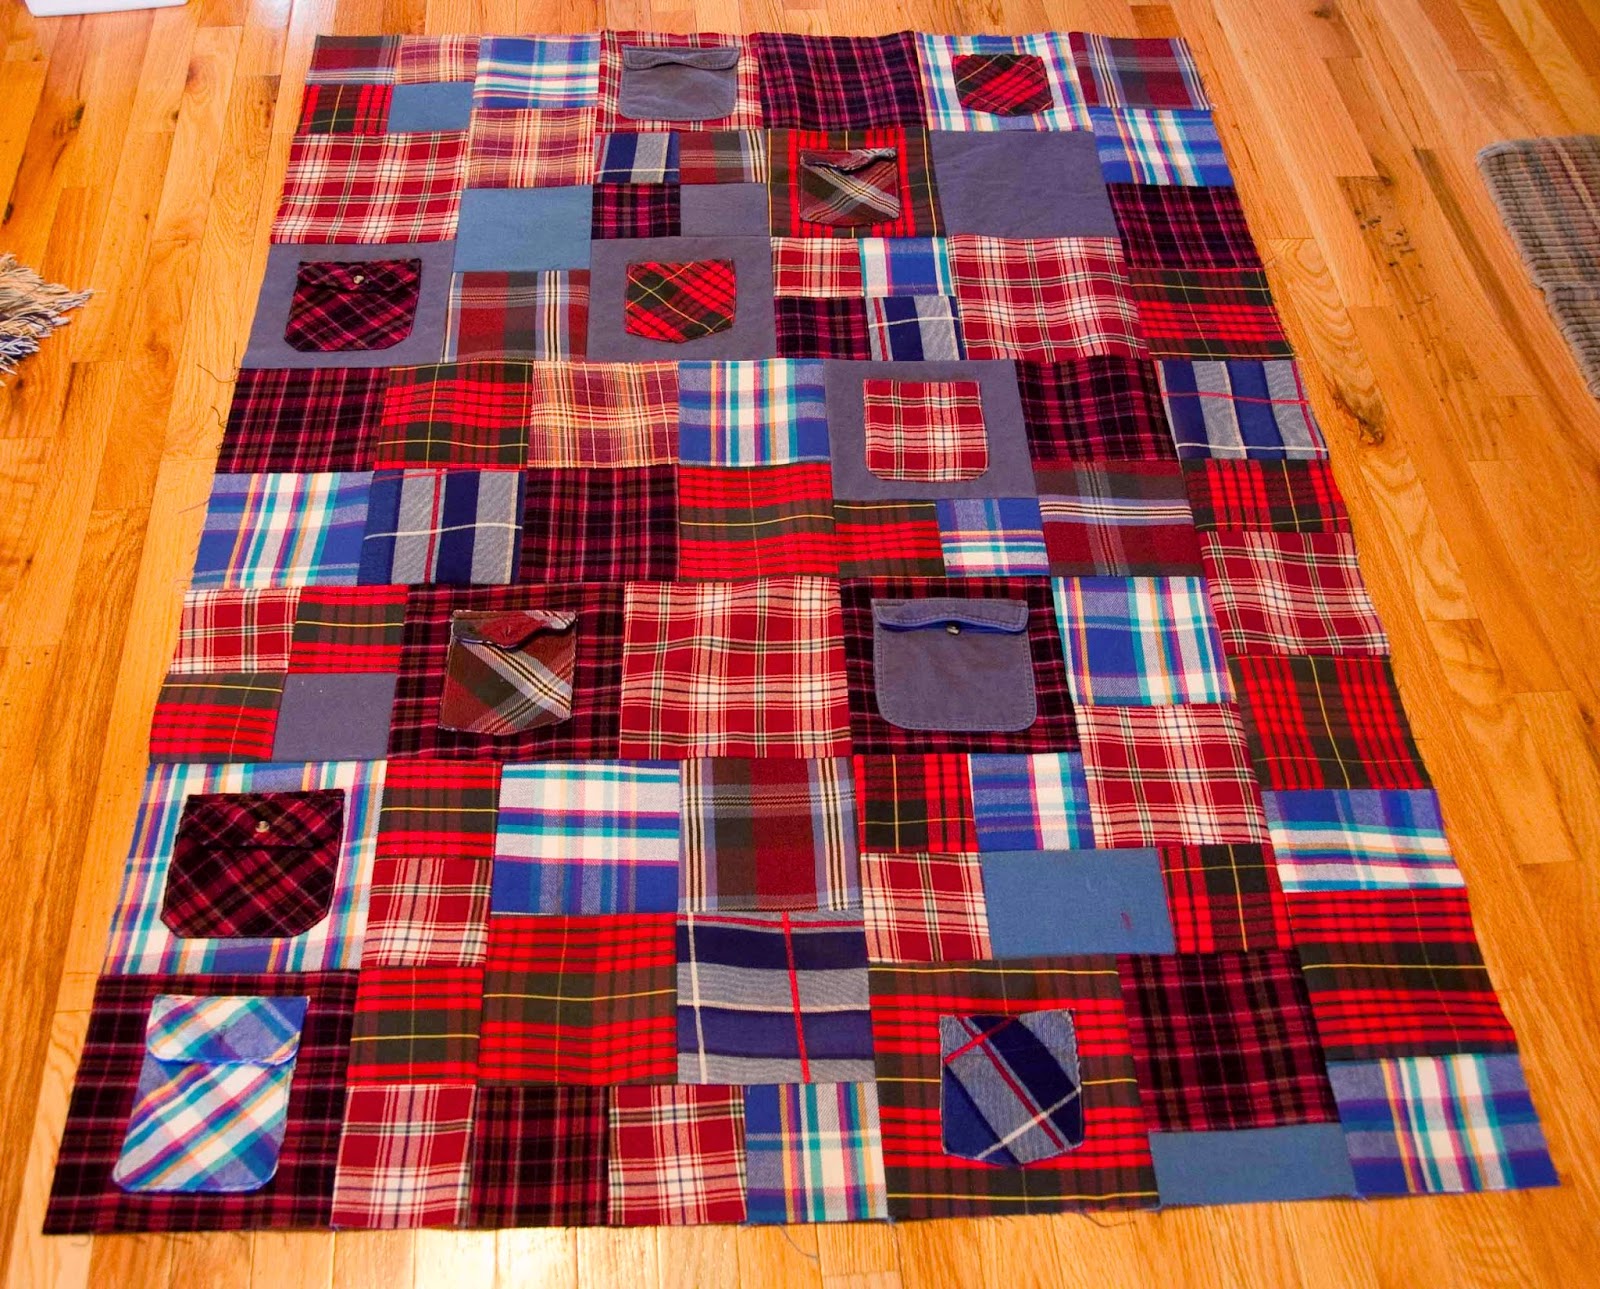 Scraps-a-Plenty: Completed 2012